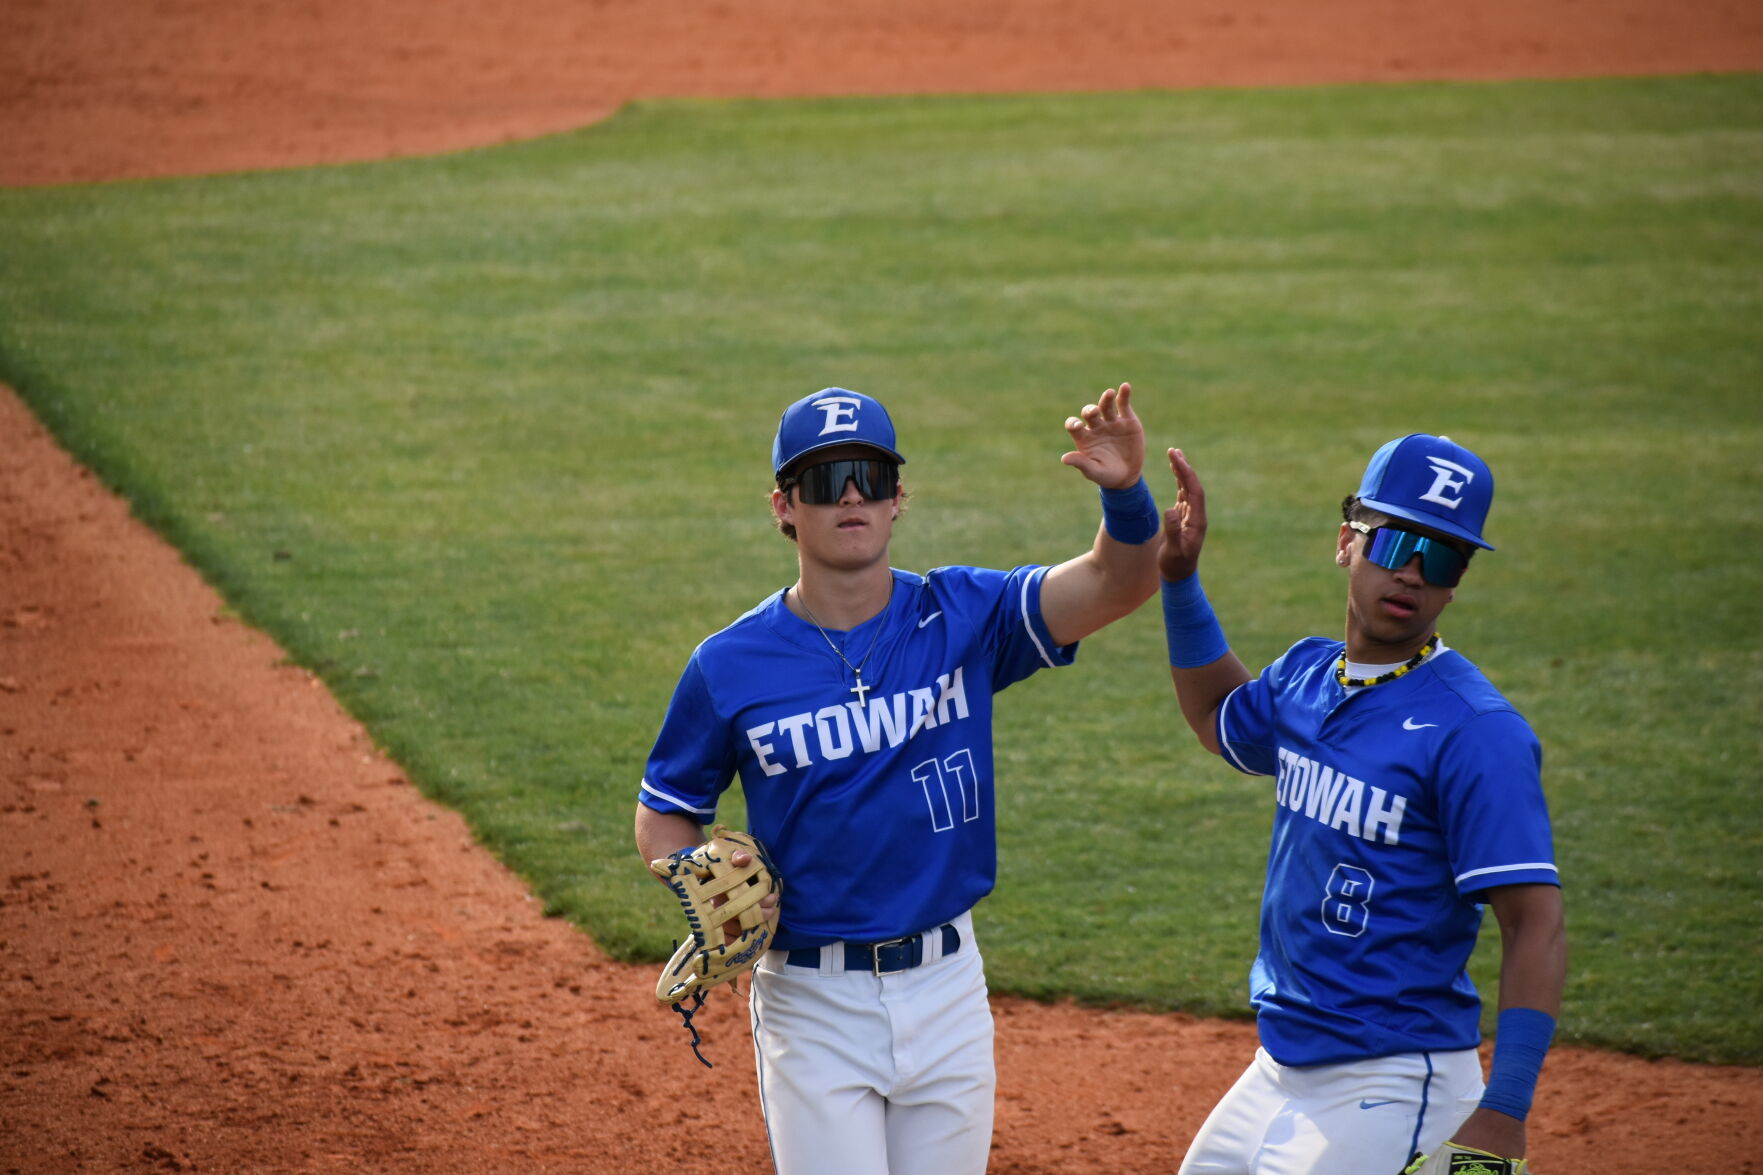 Etowah Dominates Creekview in Series Opener with Strong Pitching Performance